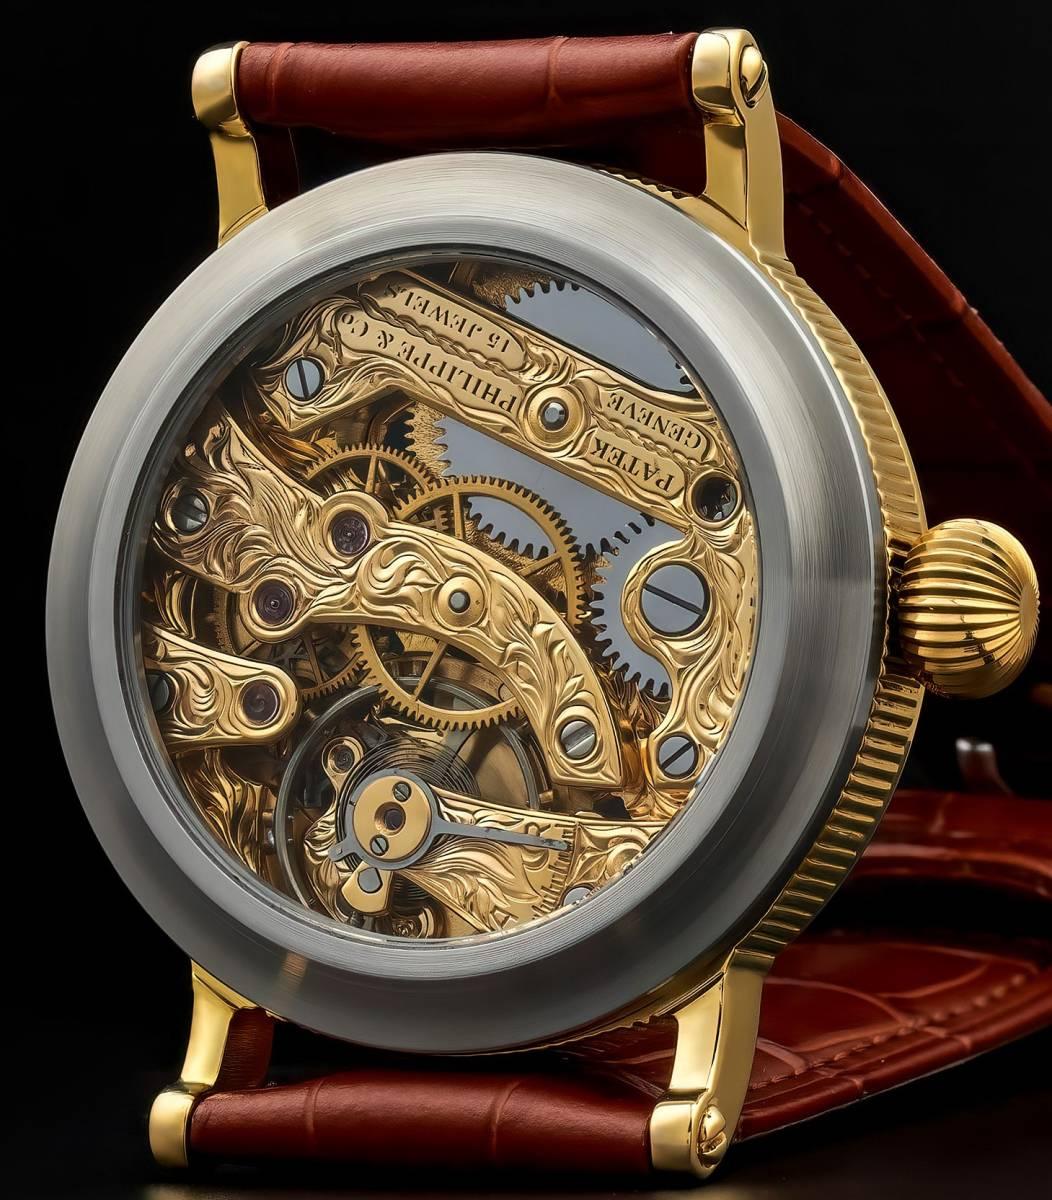 A 49.0 mm Patek Philippe Carved Gold Dial Leather Band Watch With Pocket Watch - Murphy Johnson Watches Co.